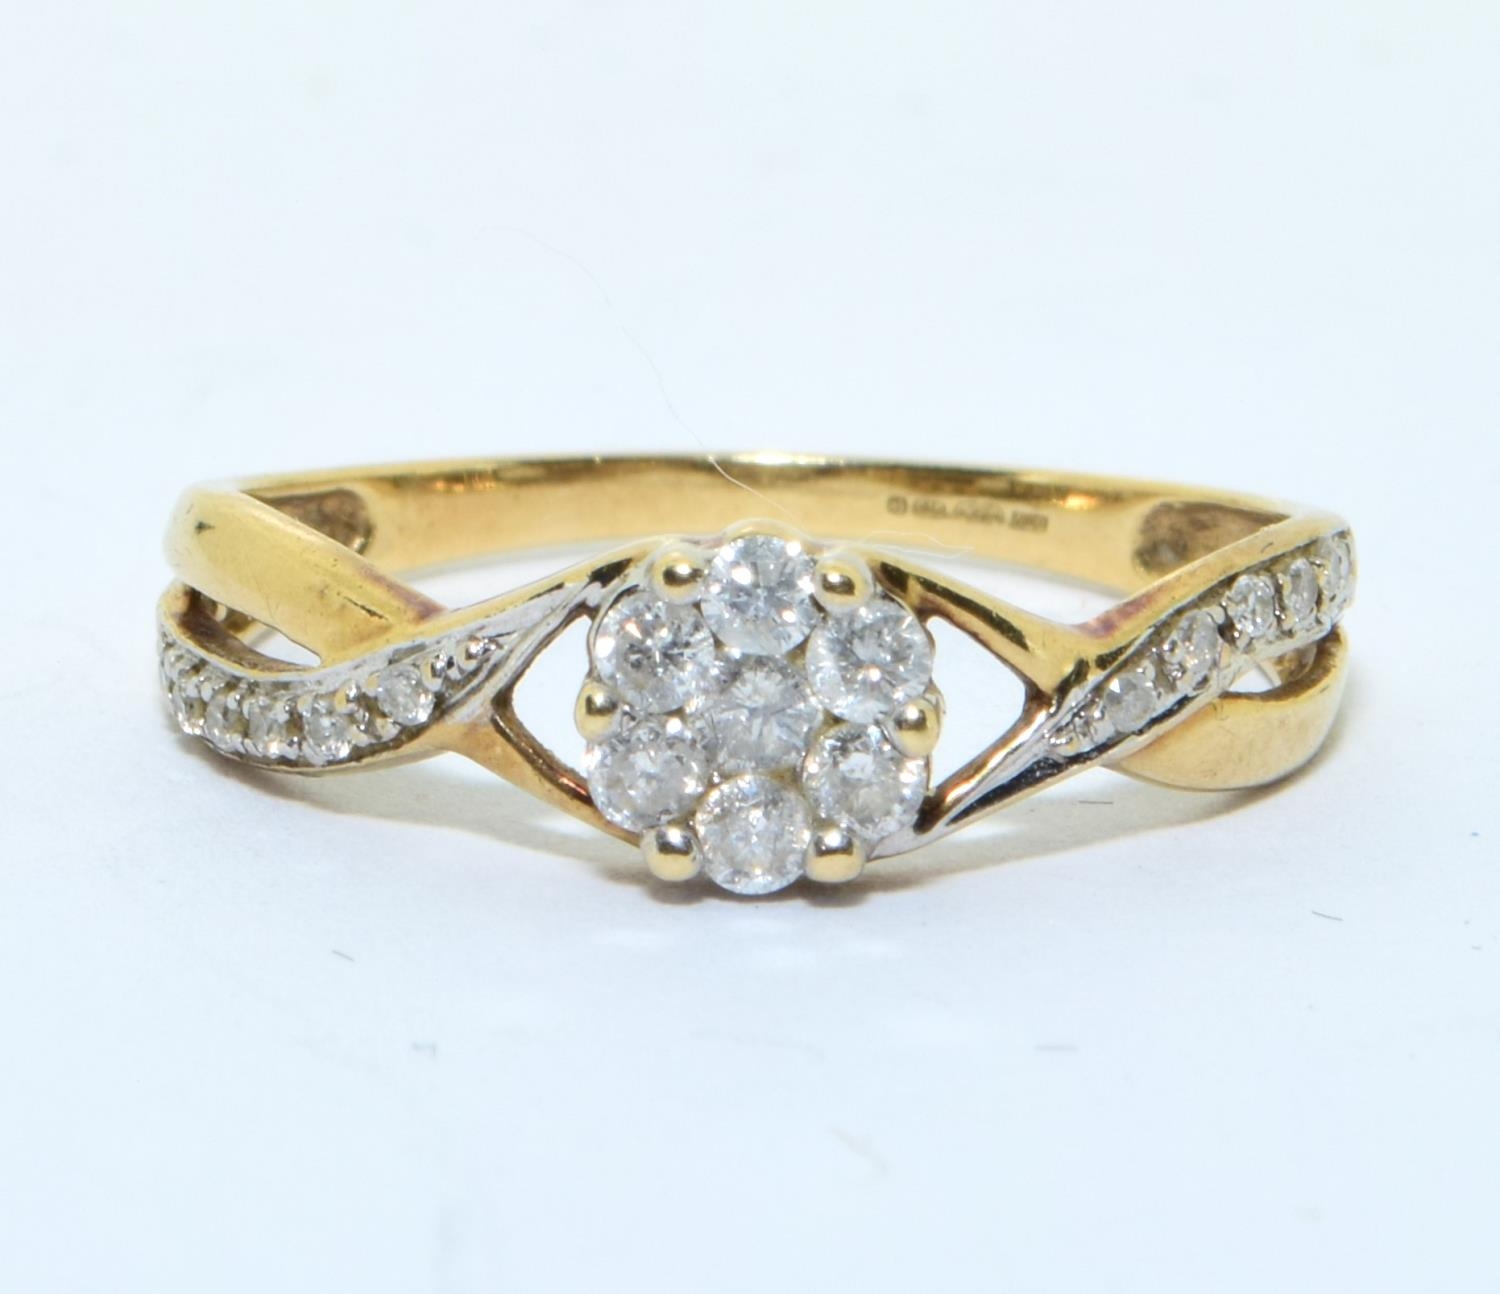 9ct gold Diamond cluster ring with Diamonds to the shank hall marked as 0.25ct size N